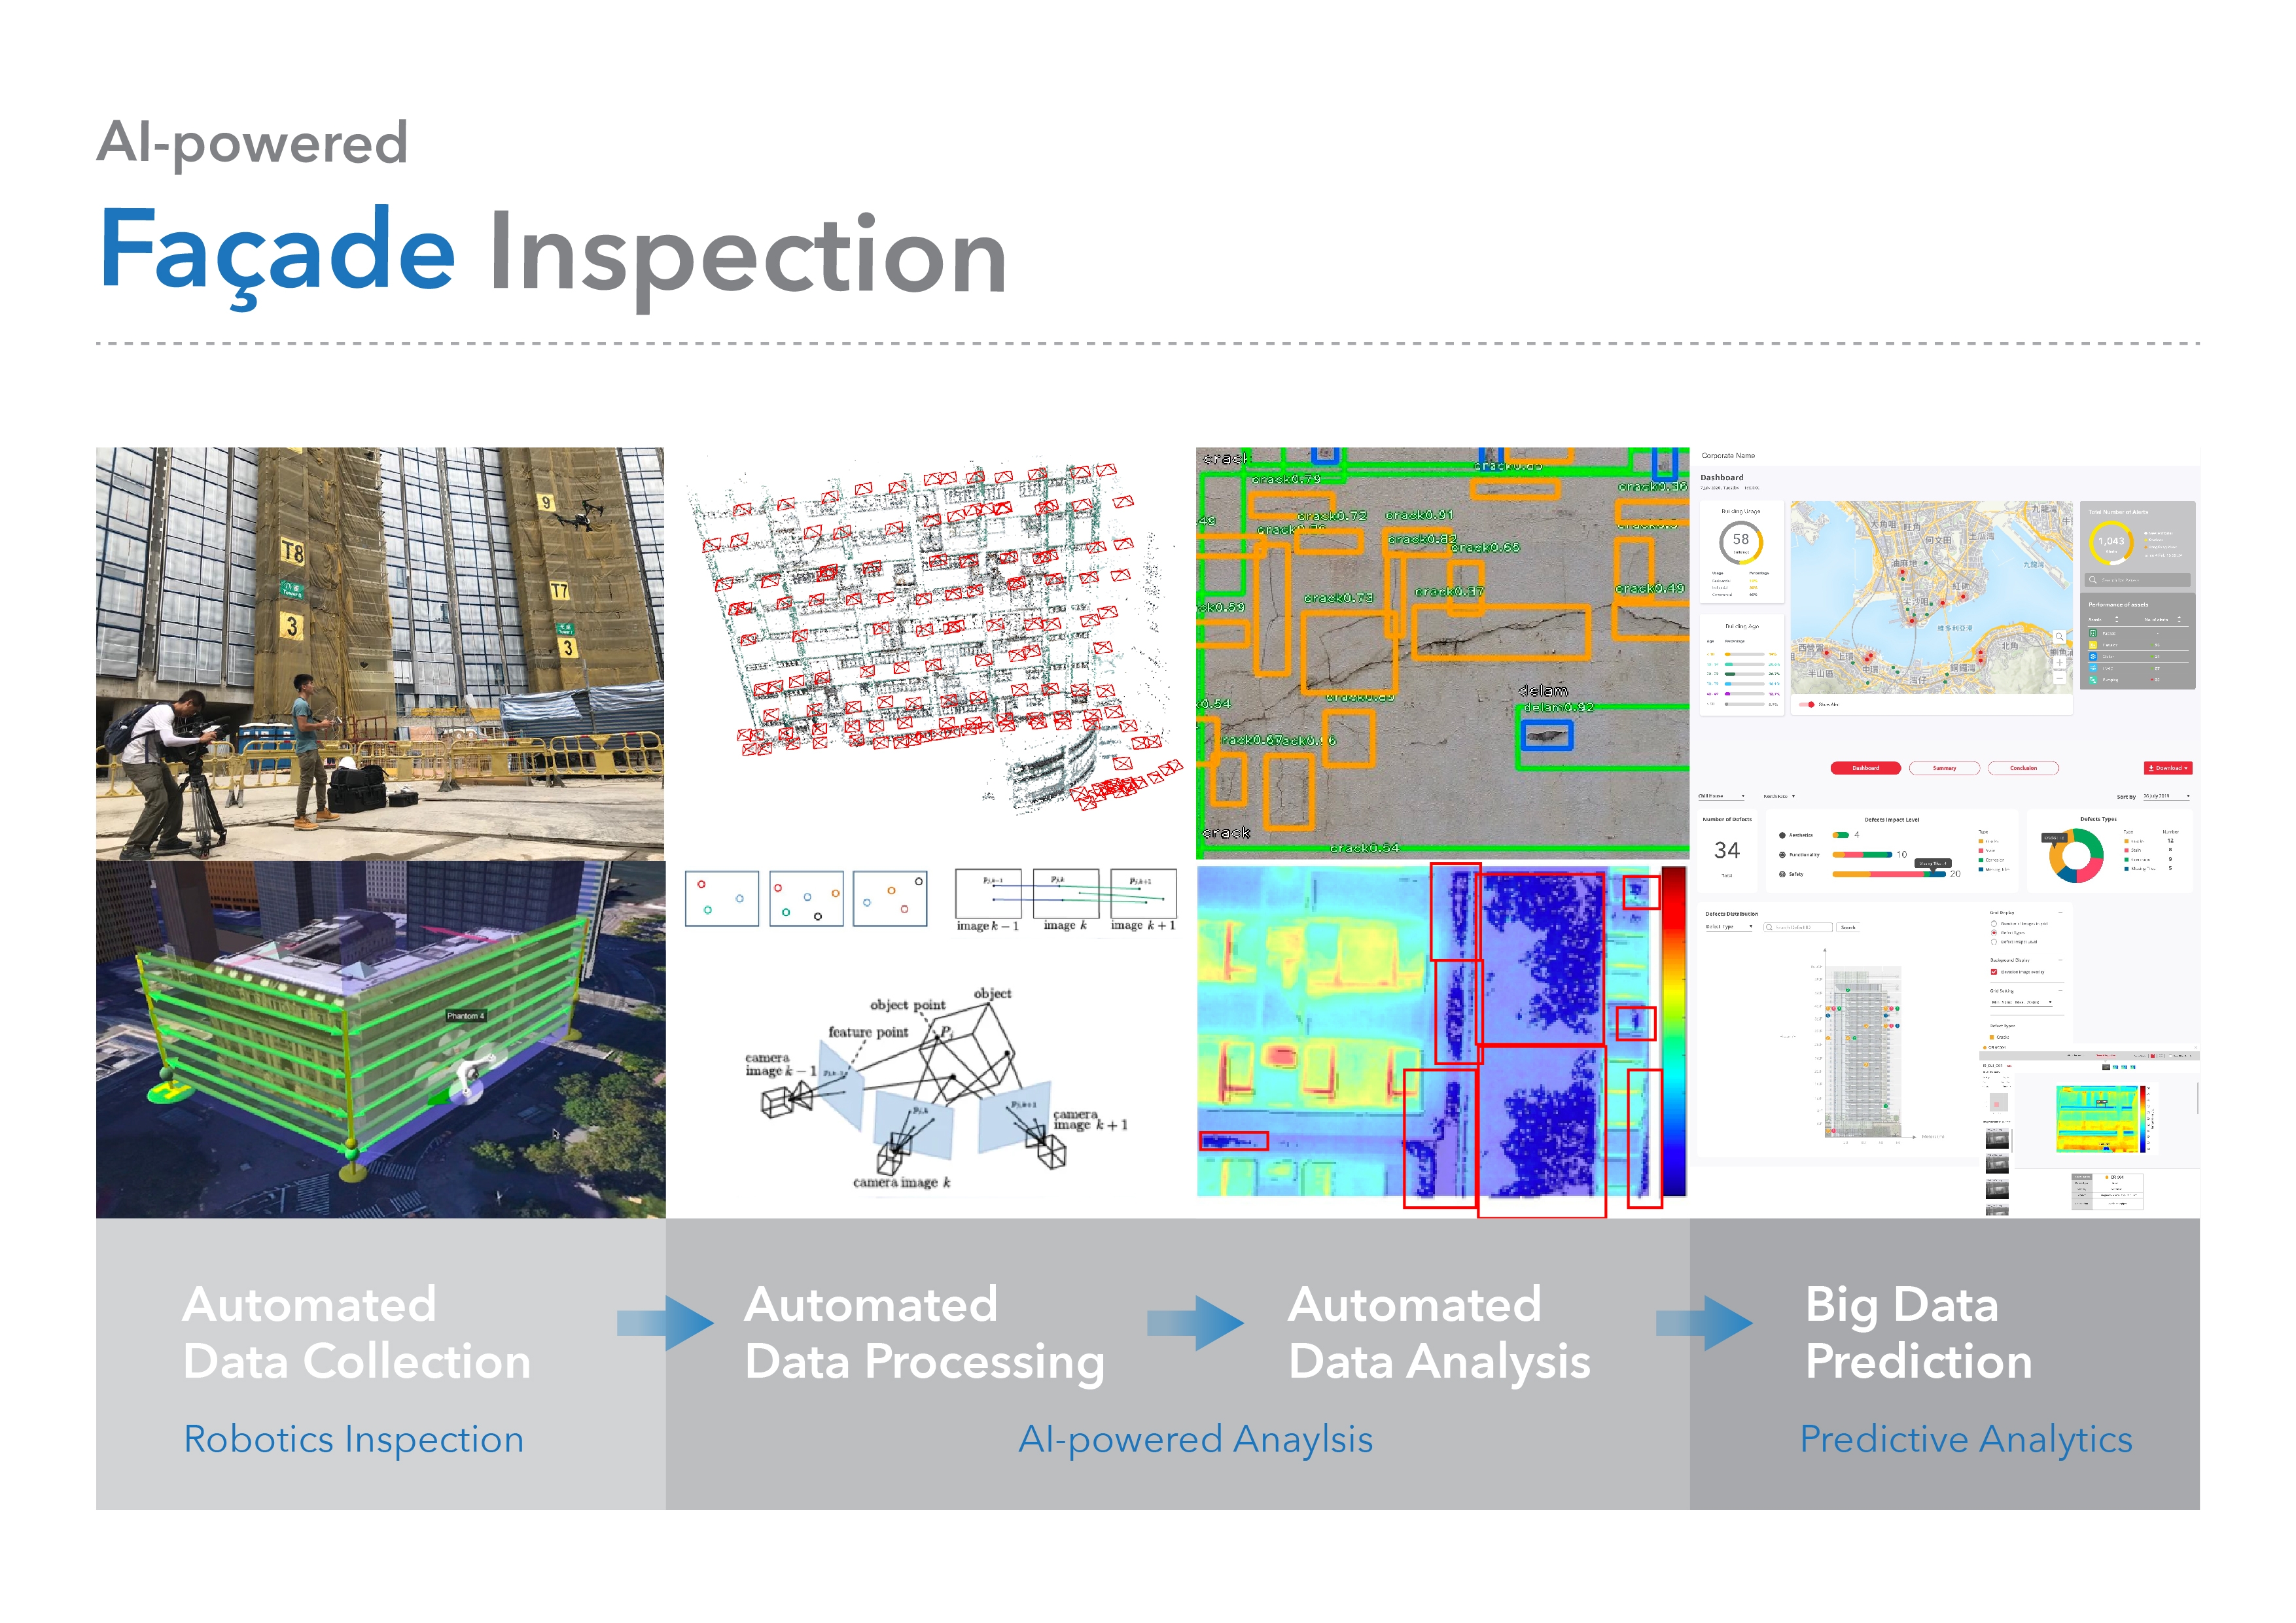 Picture: RaSpect’s façade inspection solution.